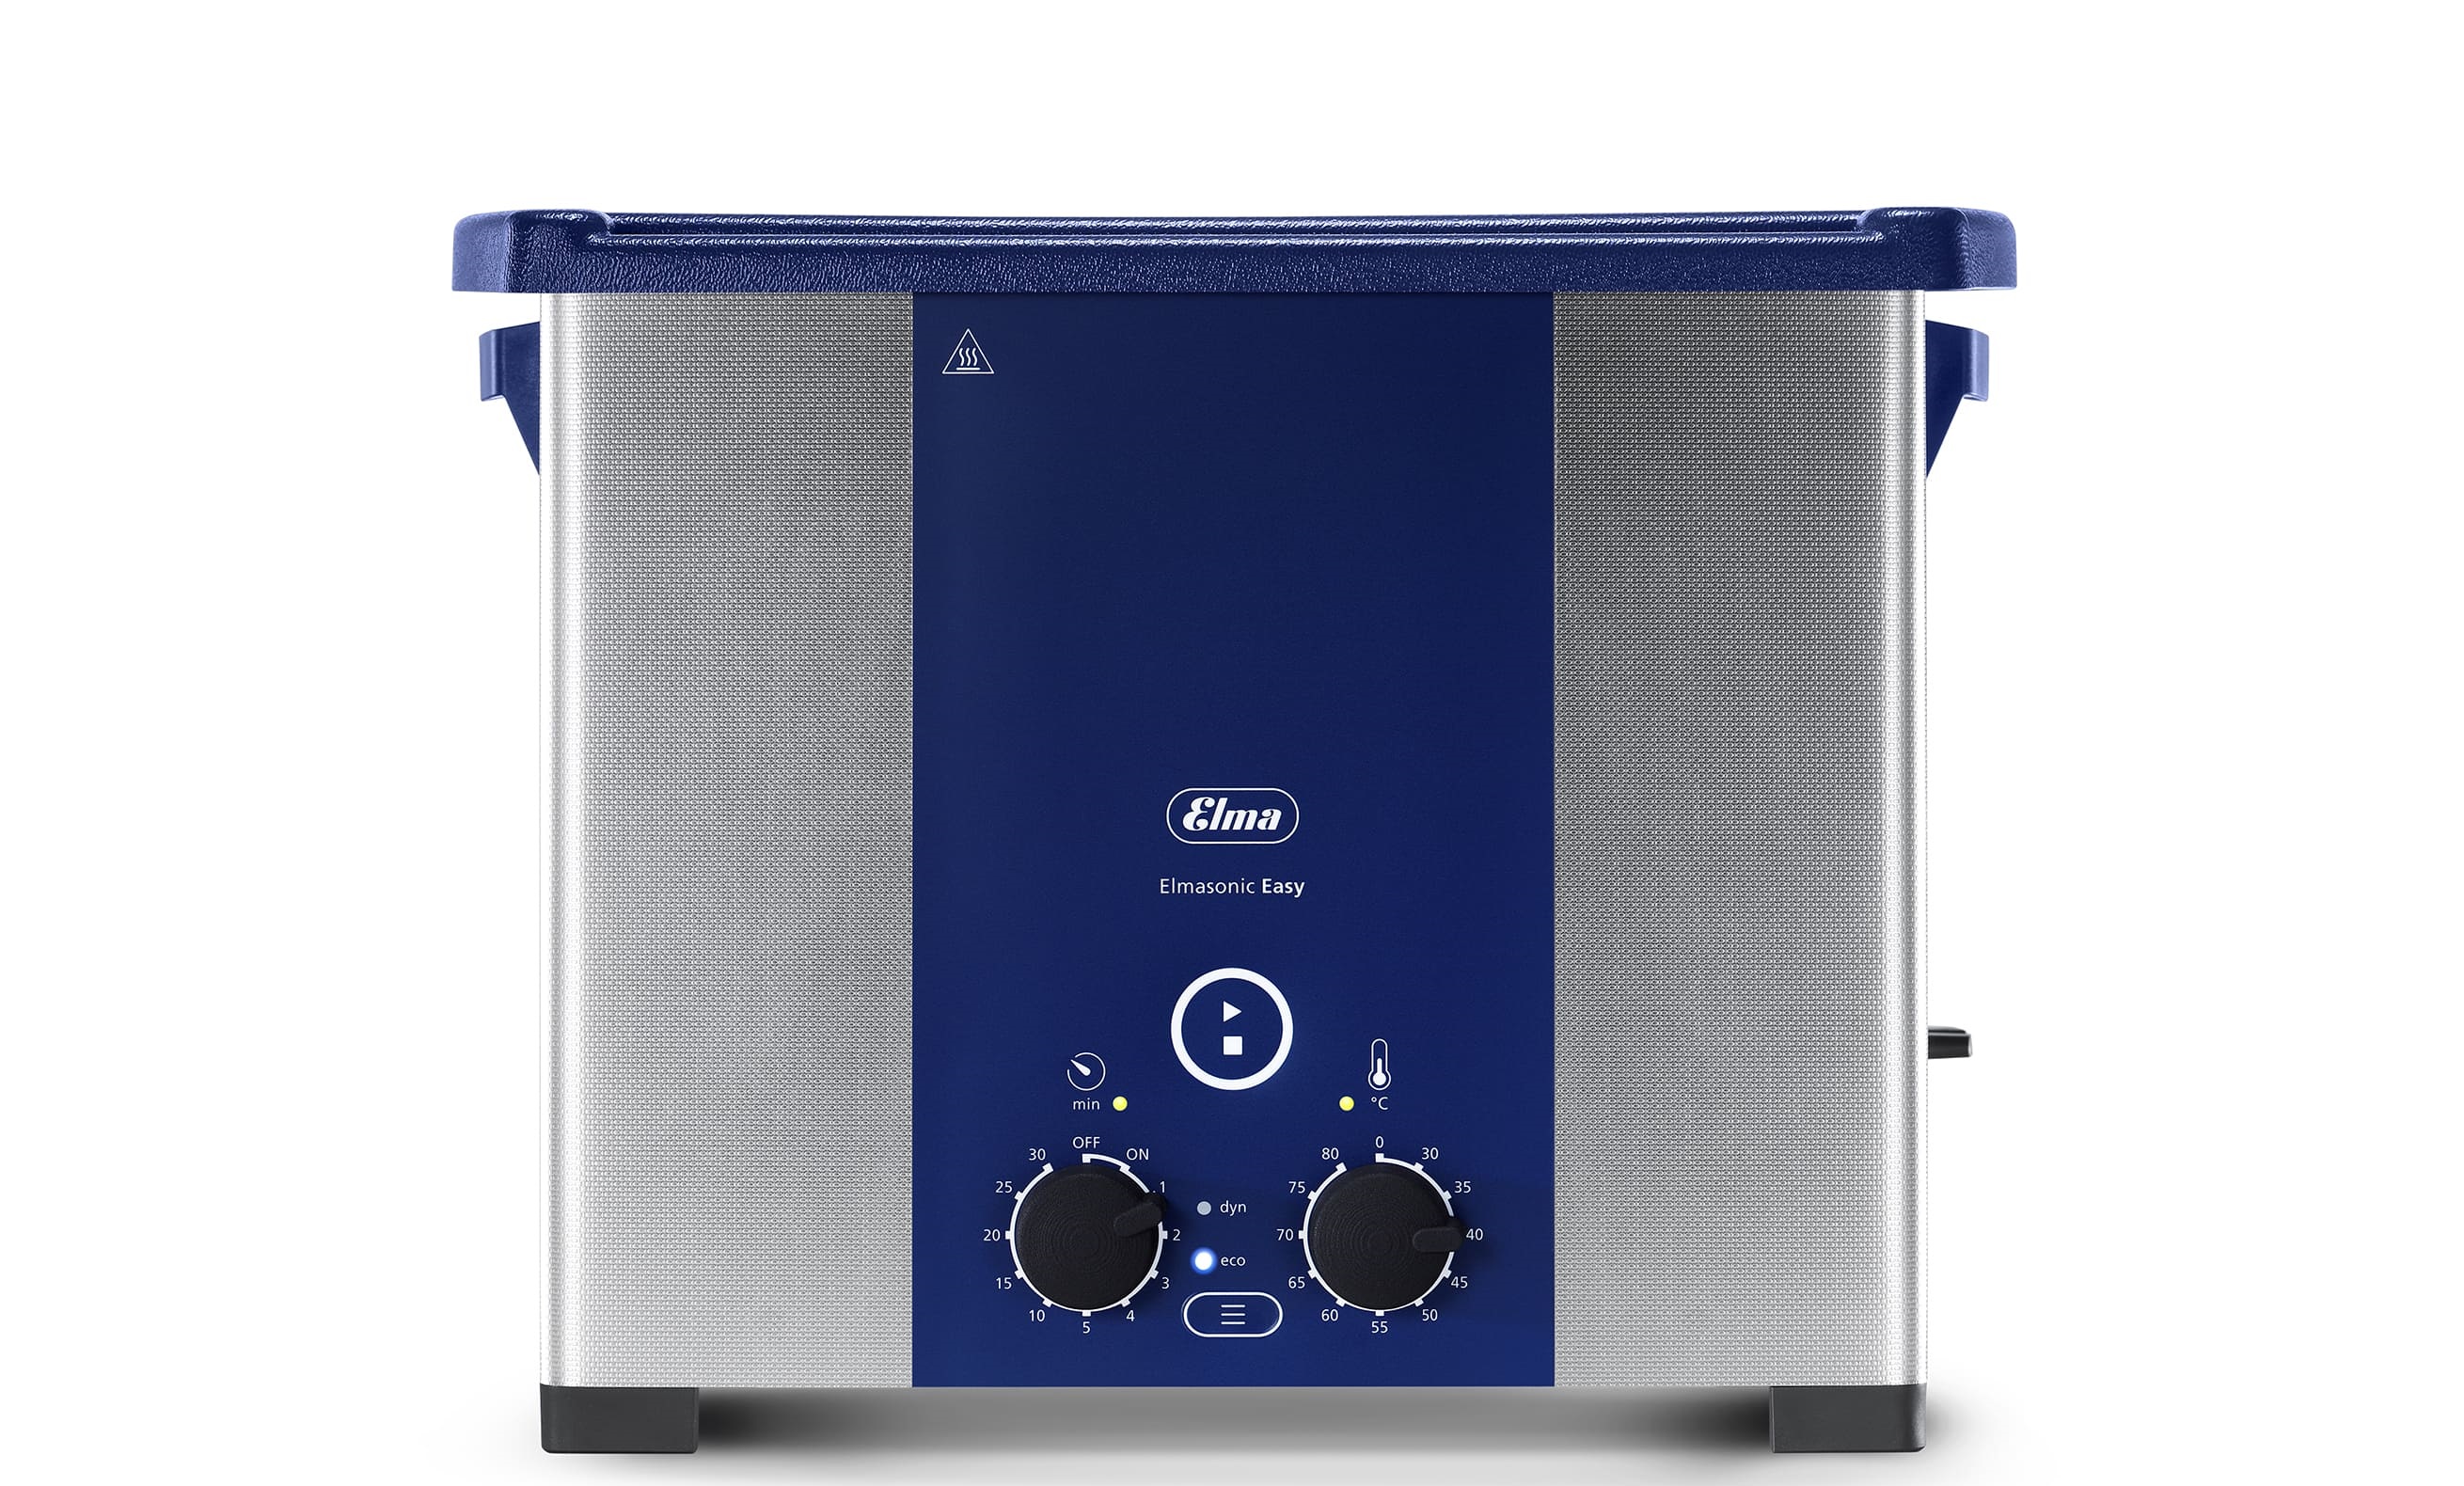 TABLETOP ULTRASONIC CLEANERS